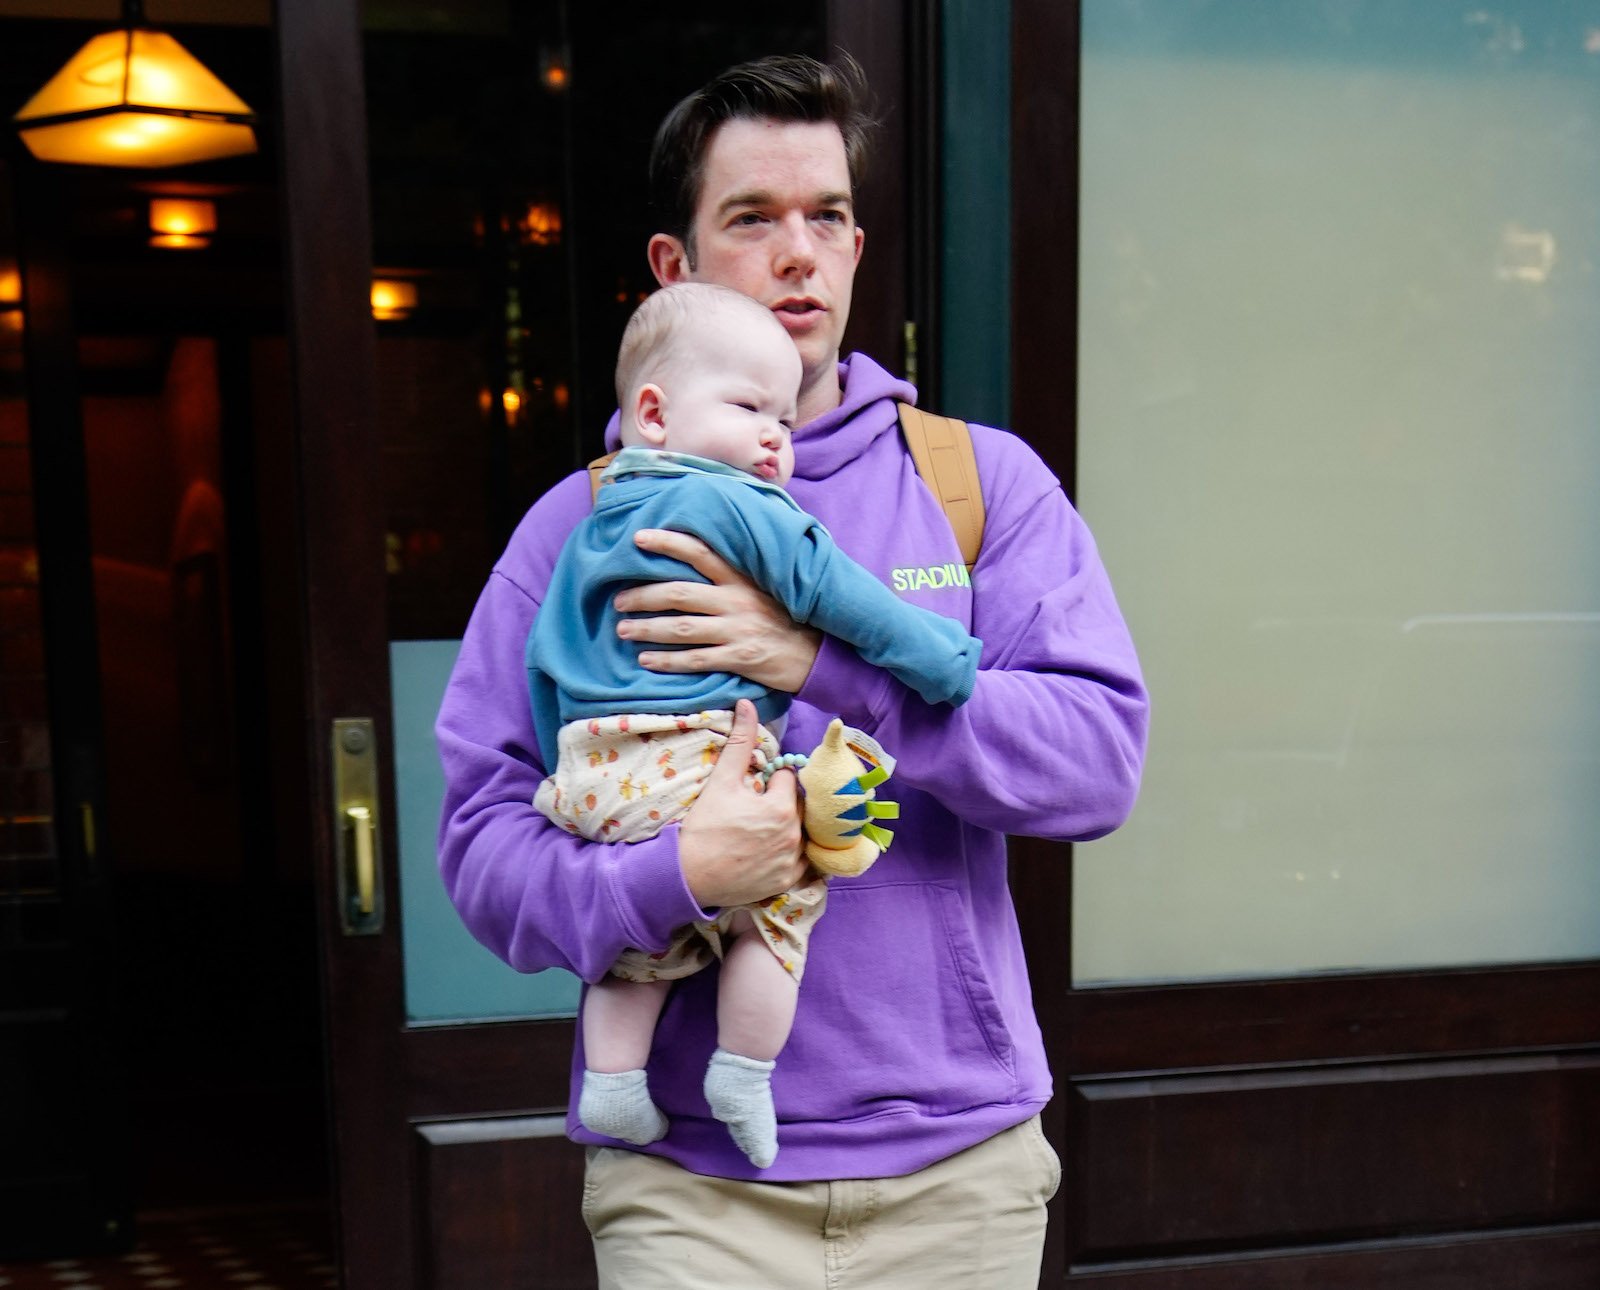 John Mulaney’s Son Someday? He Recalled Being an ‘off Putting Strange Child’ Who Loved Frank Sinatra